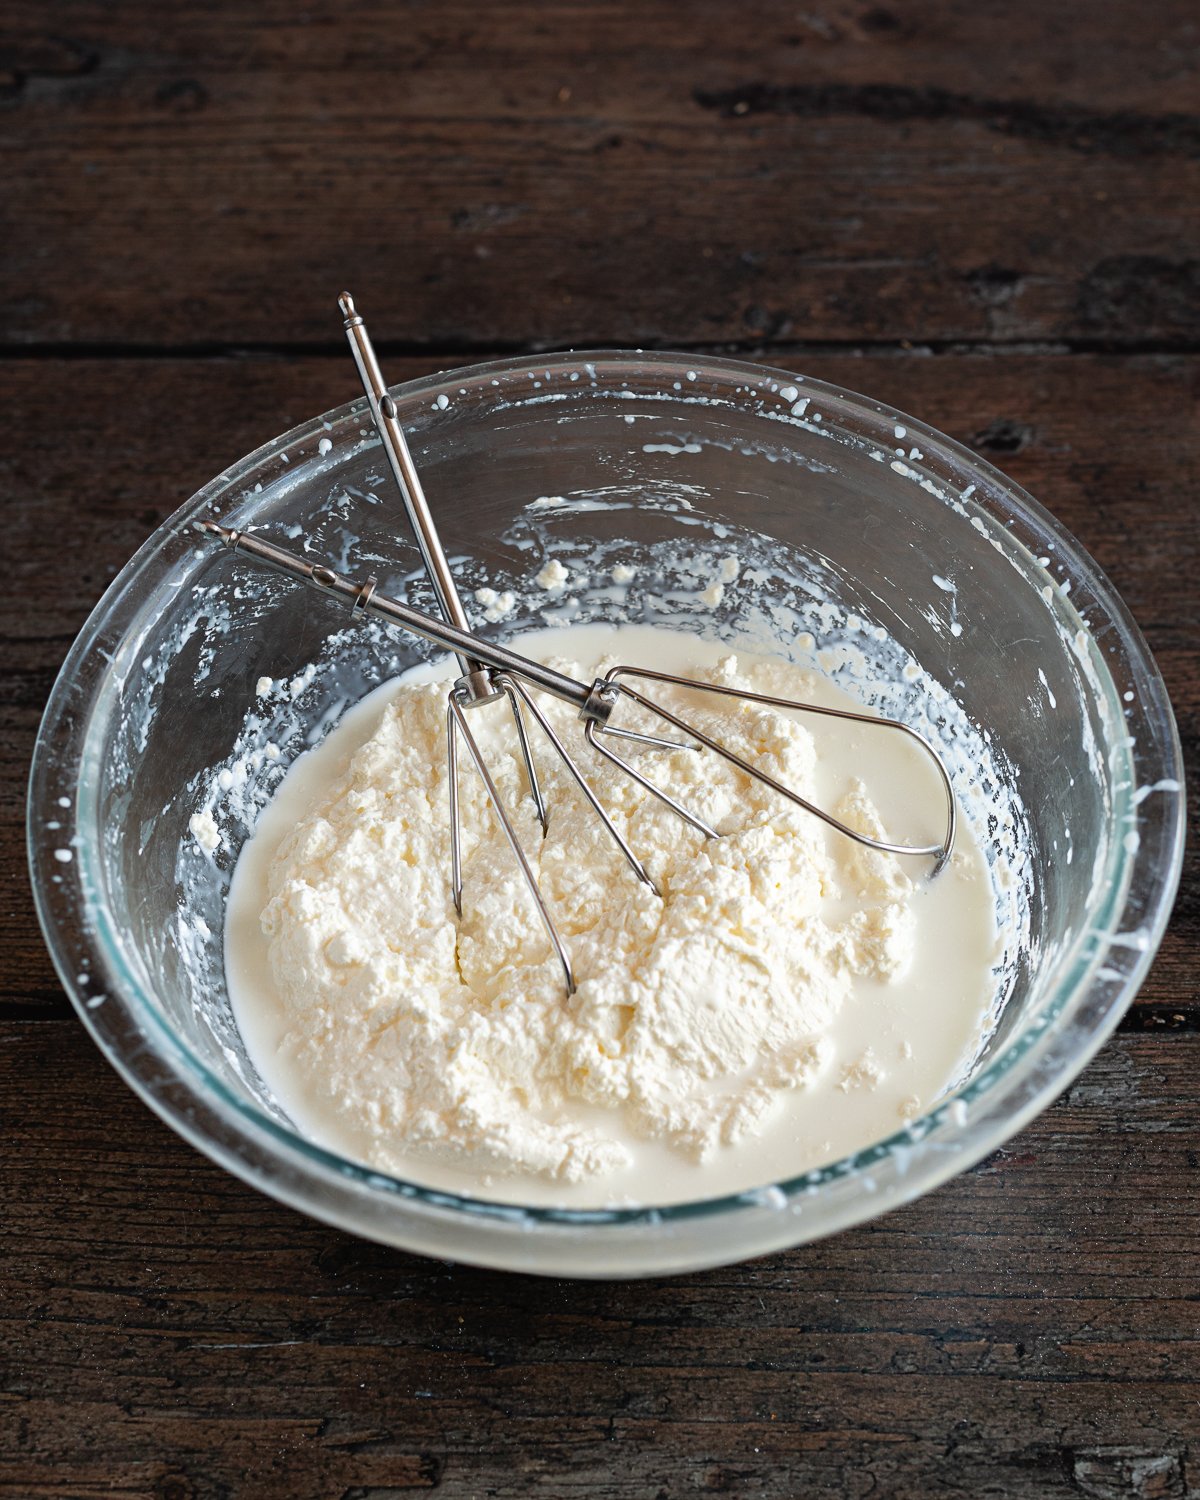 whipped cream with curds and whey separated inside a glass bowl with wire beaters